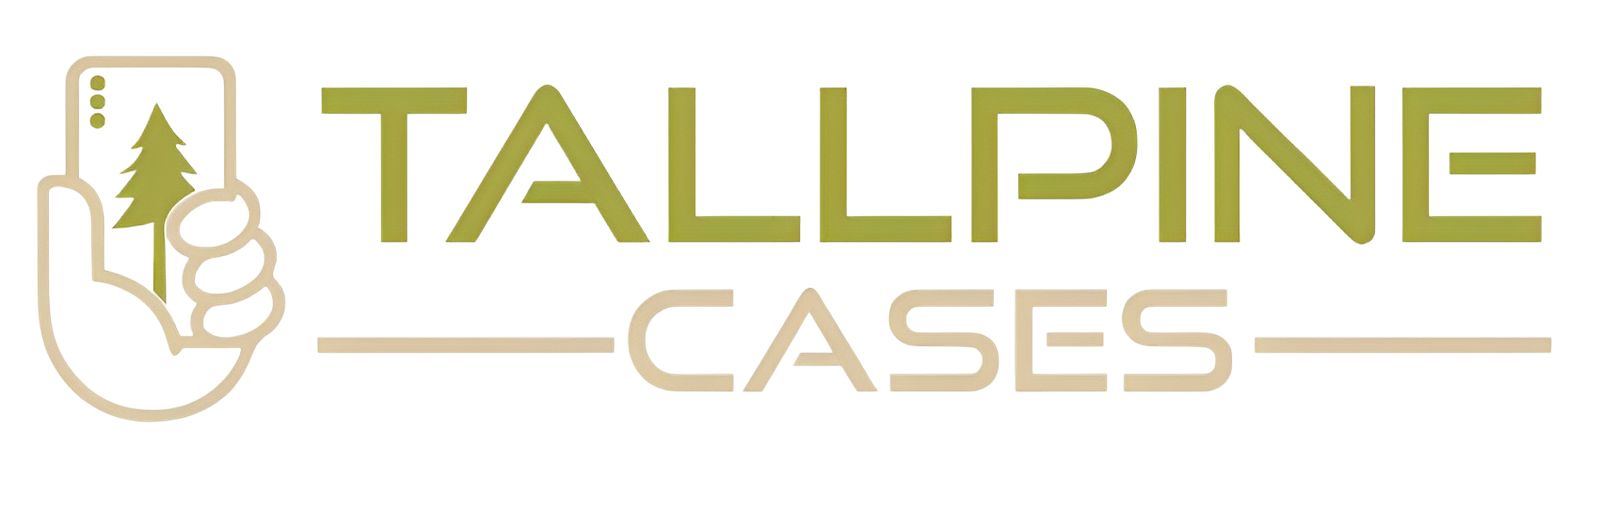 Exclusive Offer: 10% Off Tallpine Cases Coupon Code!